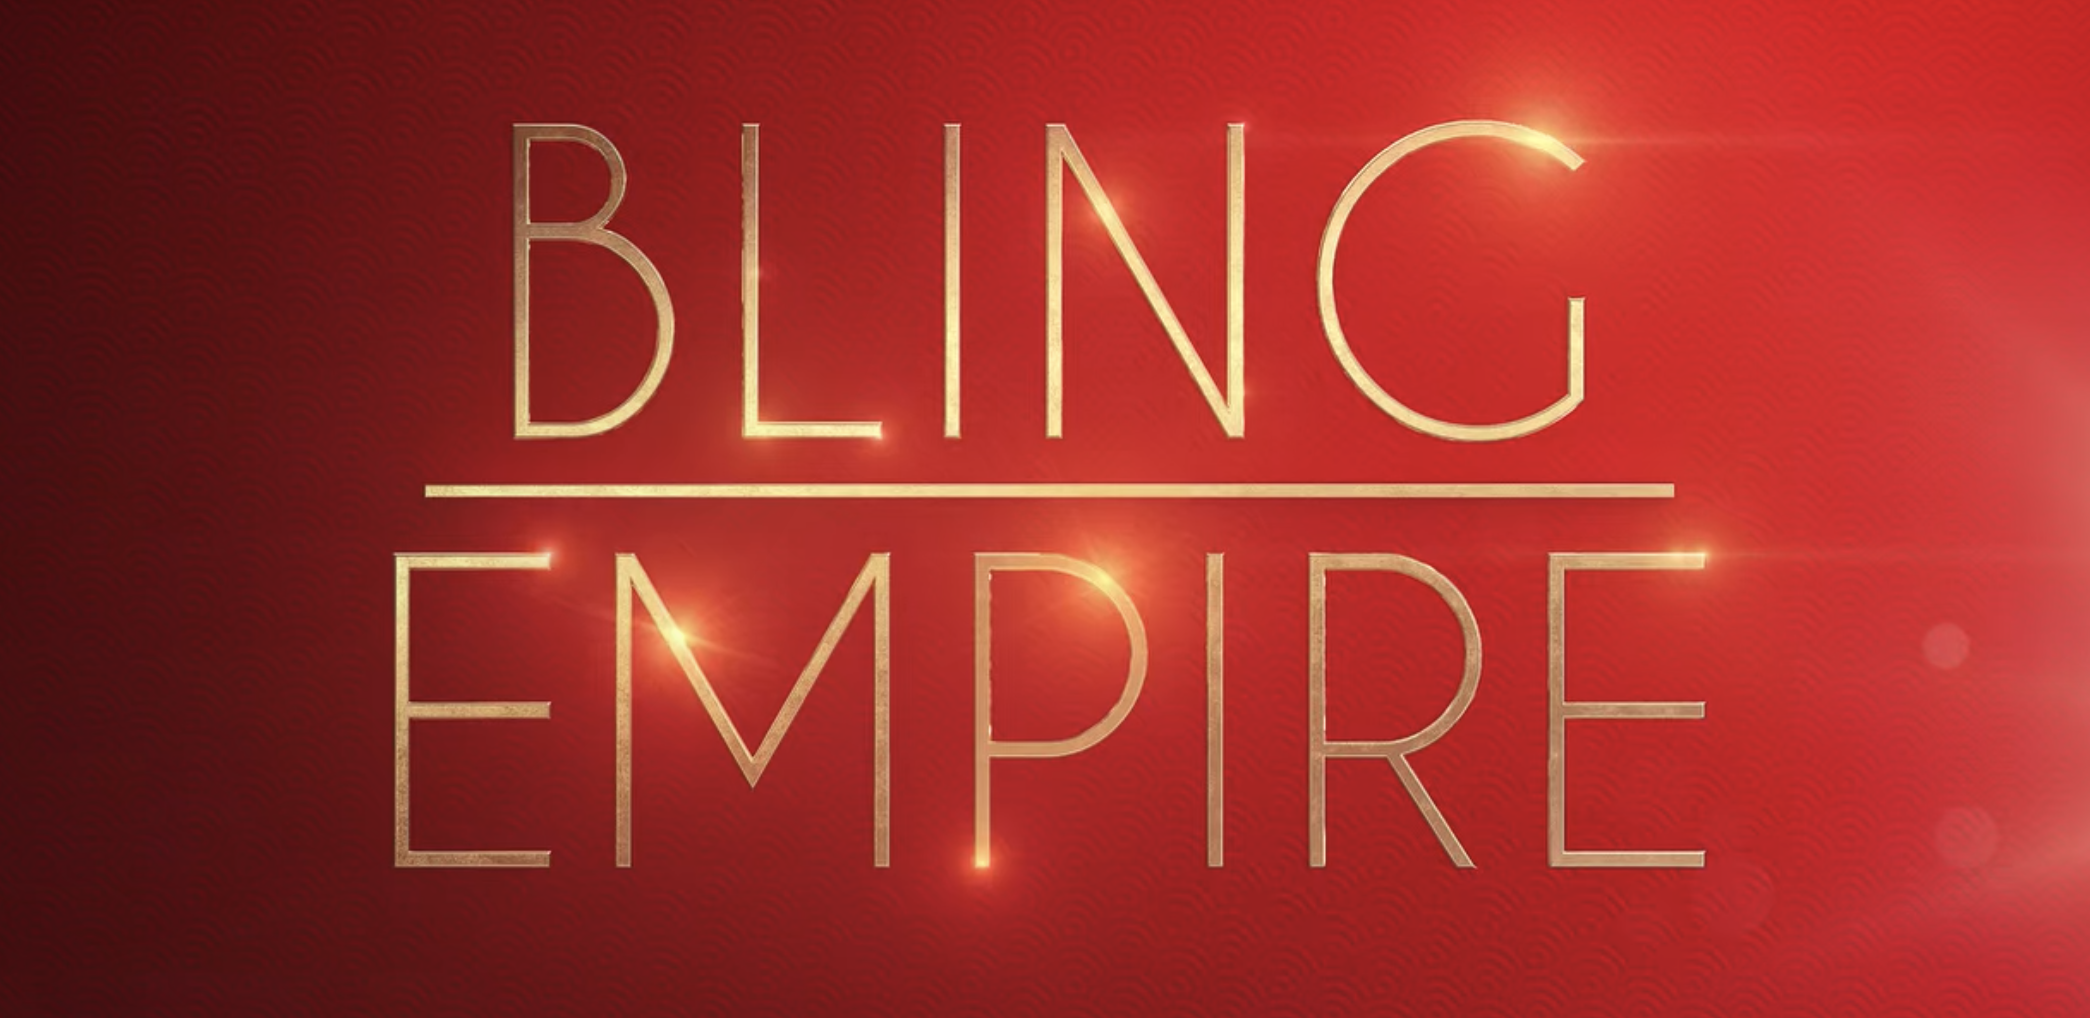 Bling Empire Premiere Party Had a Diamond Jewelry Claw Machine